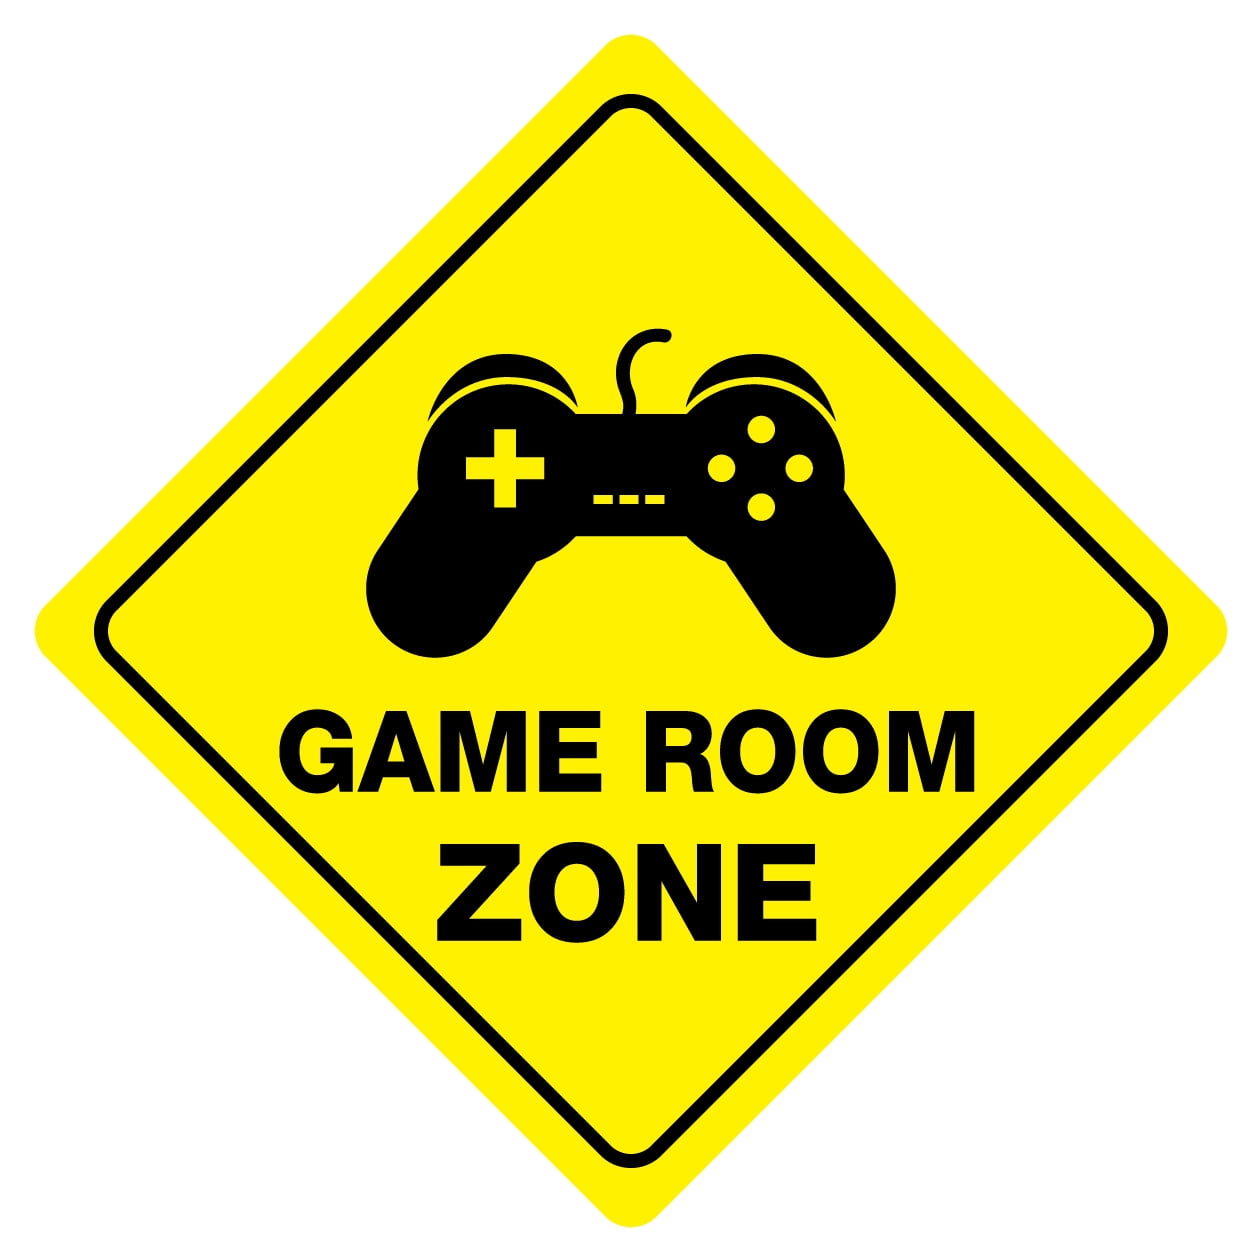 Gamer Sign for Room Door Wall Decor Uflashmi I’m Gaming Sign Metal 8X10 Inch Video Gaming Room Decor for Boys